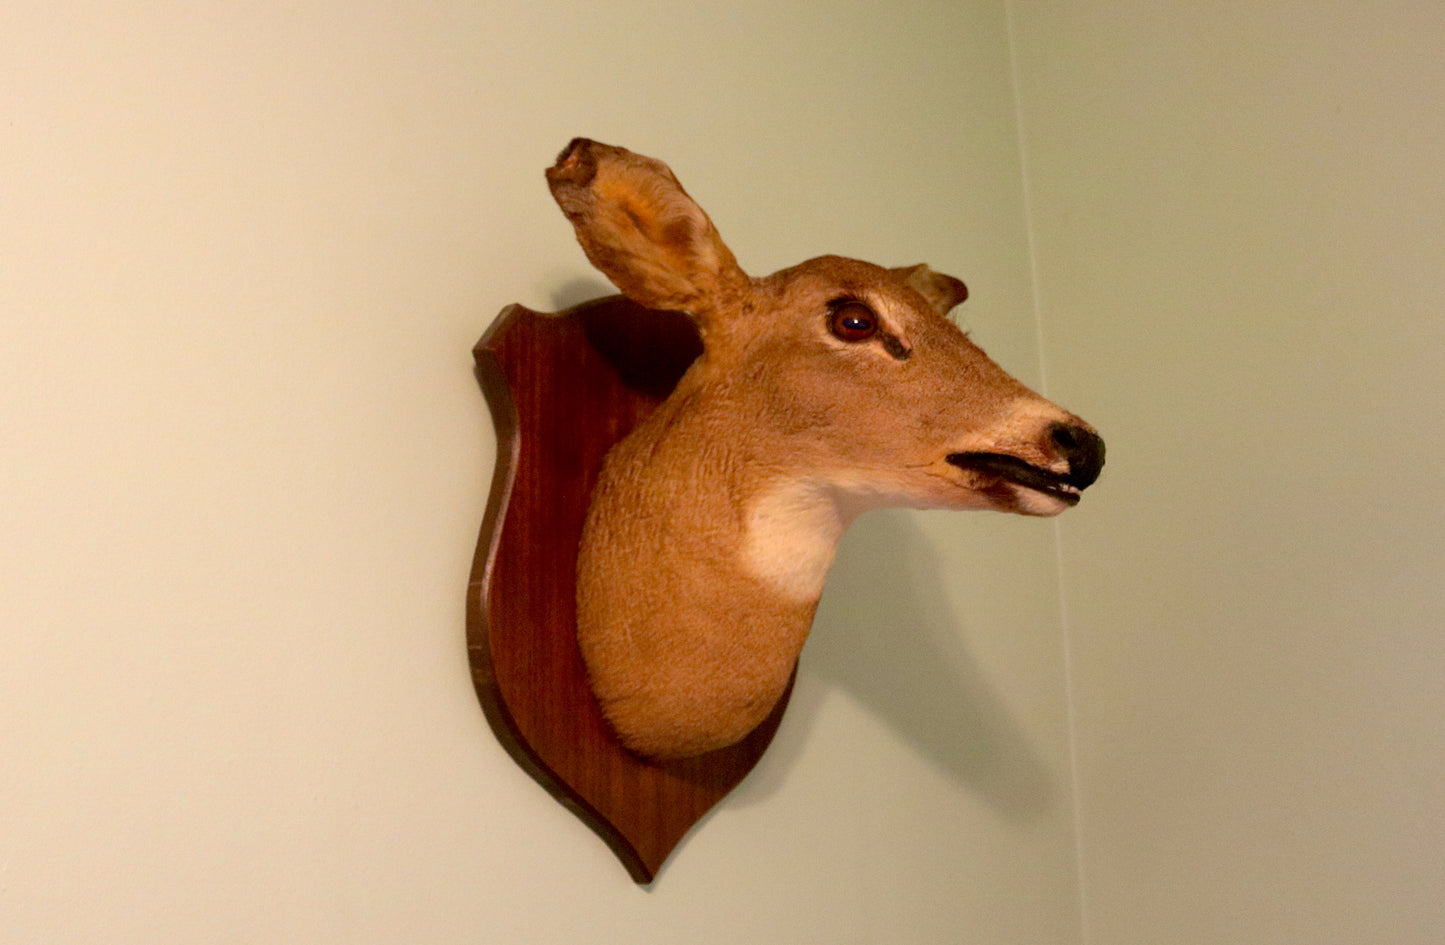 Vintage Deer Taxidermy | Derpy Deer Doe Mount, Bad Taxidermy | Real Skull, Oddities & Curiosities, Gothic Witchy Home Decor, Holiday Gift